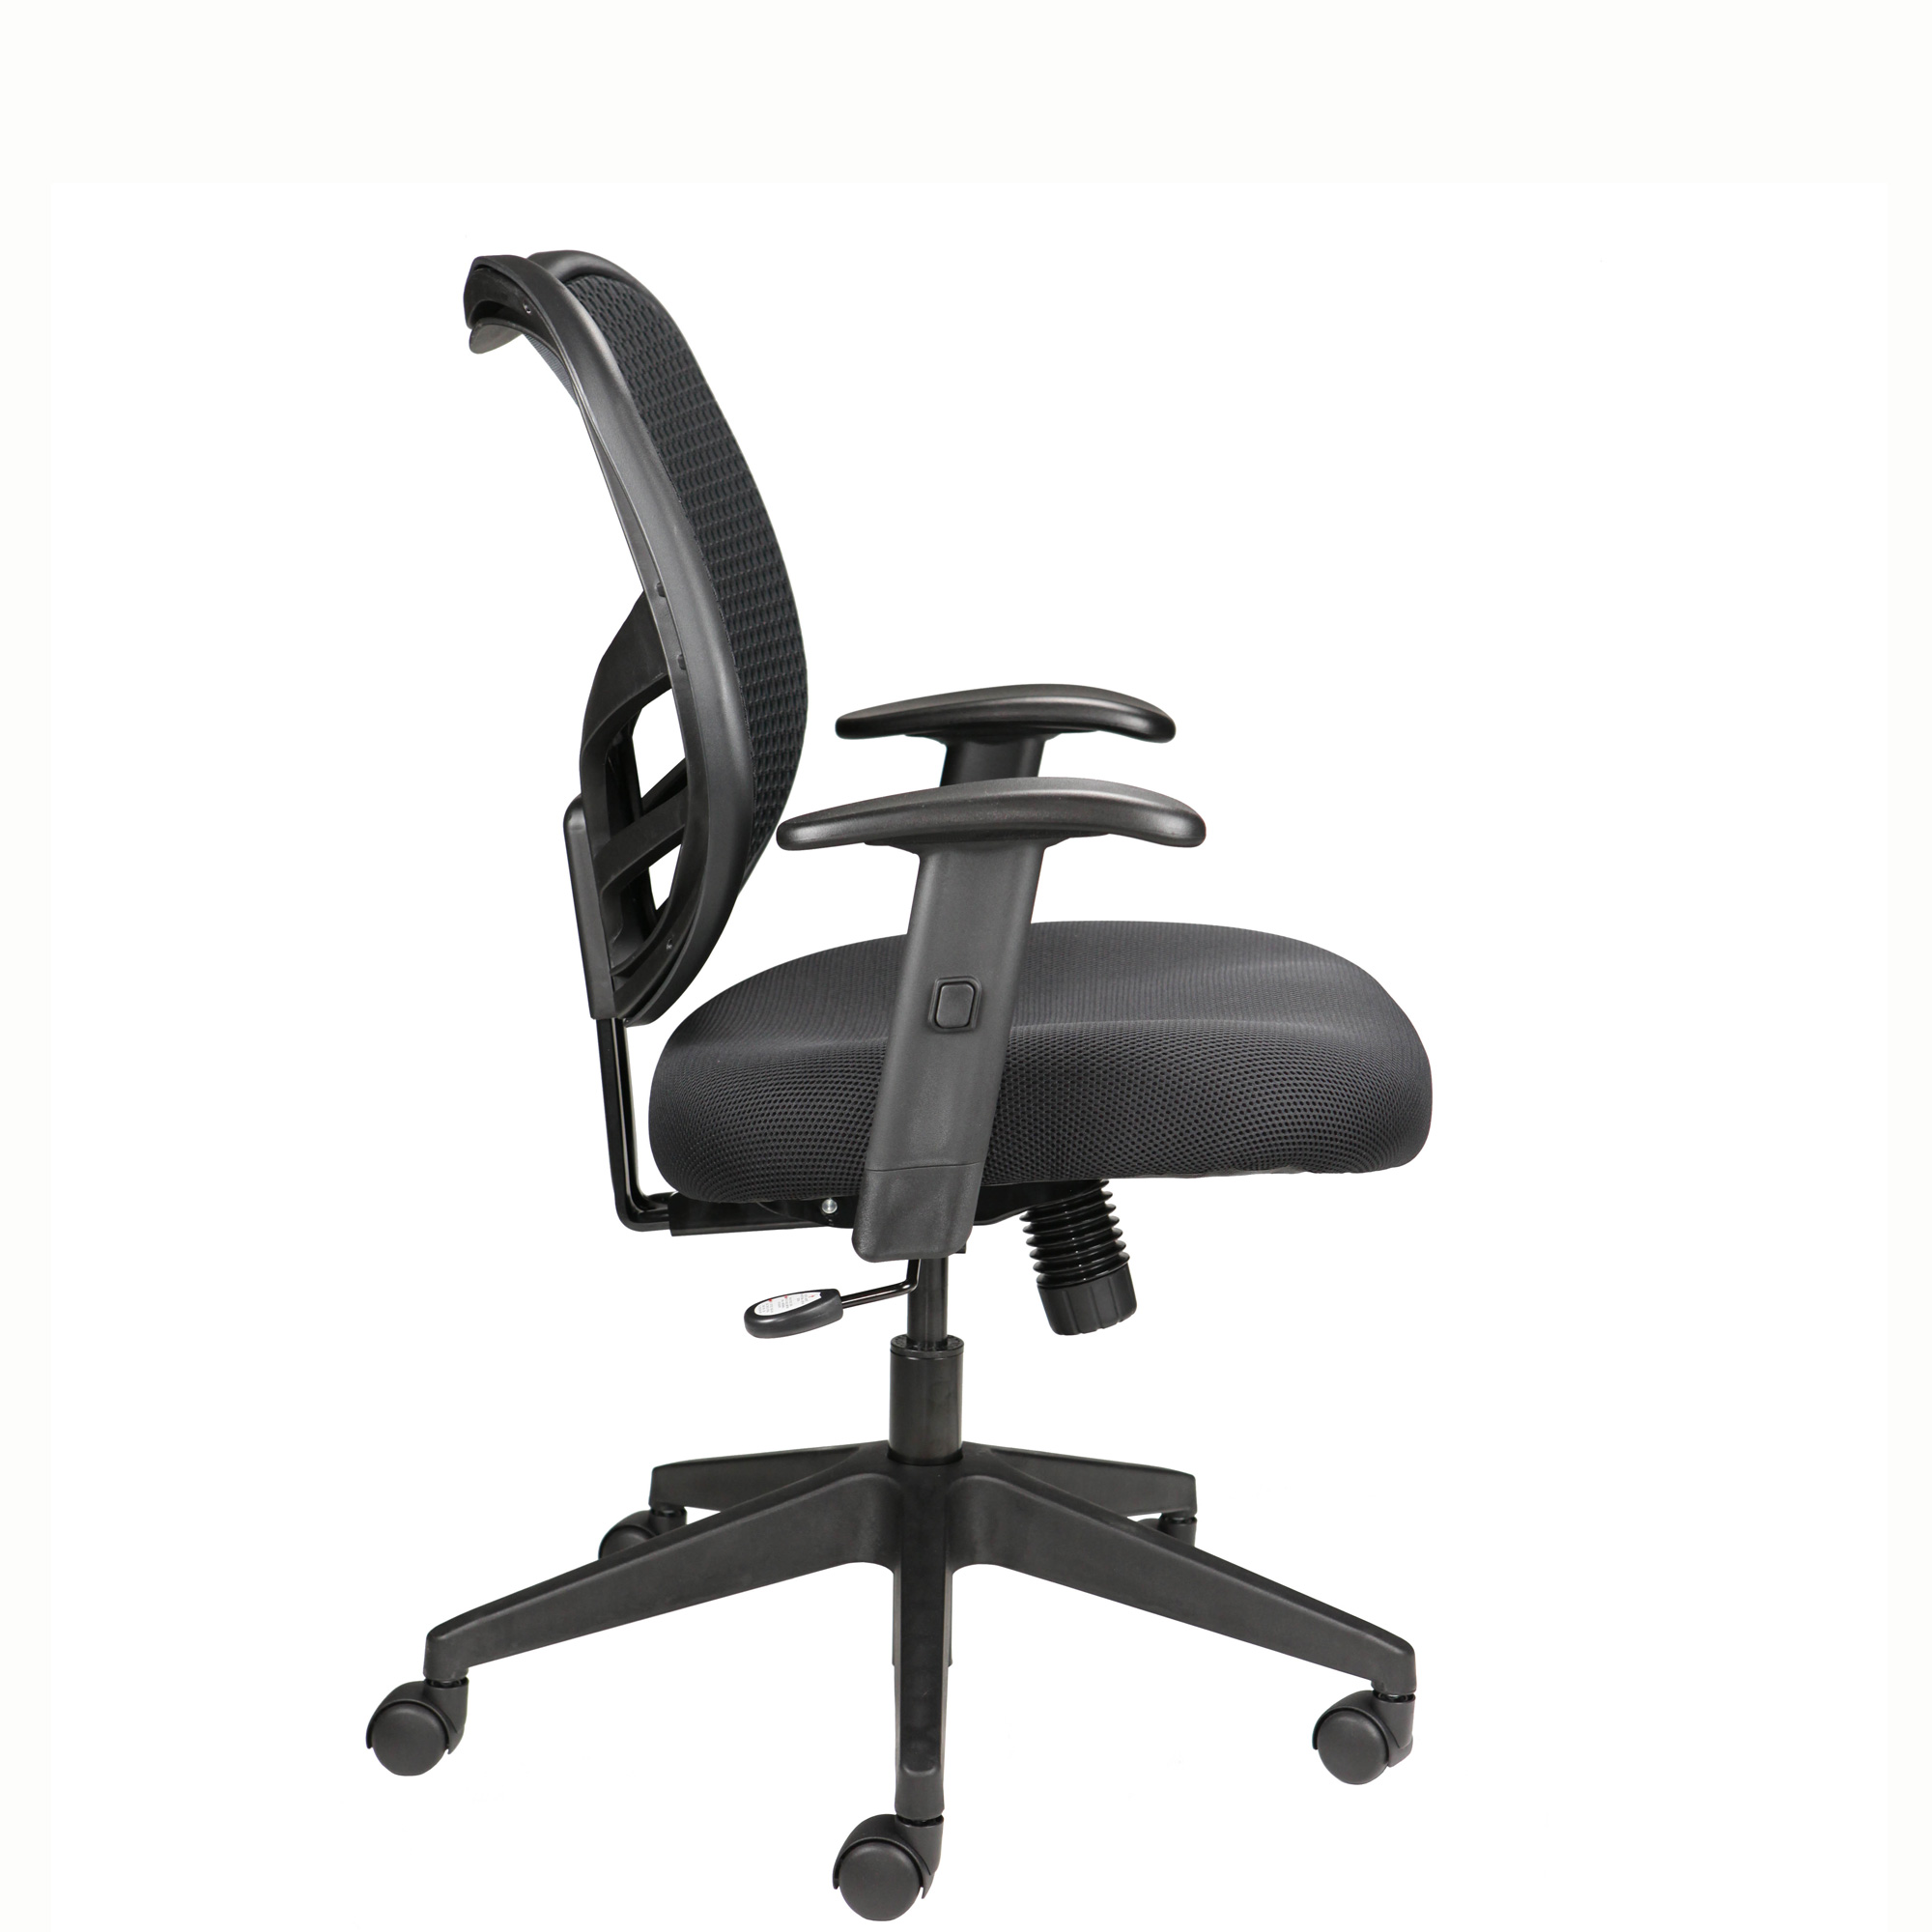 Dandy Office Chair - SIde View